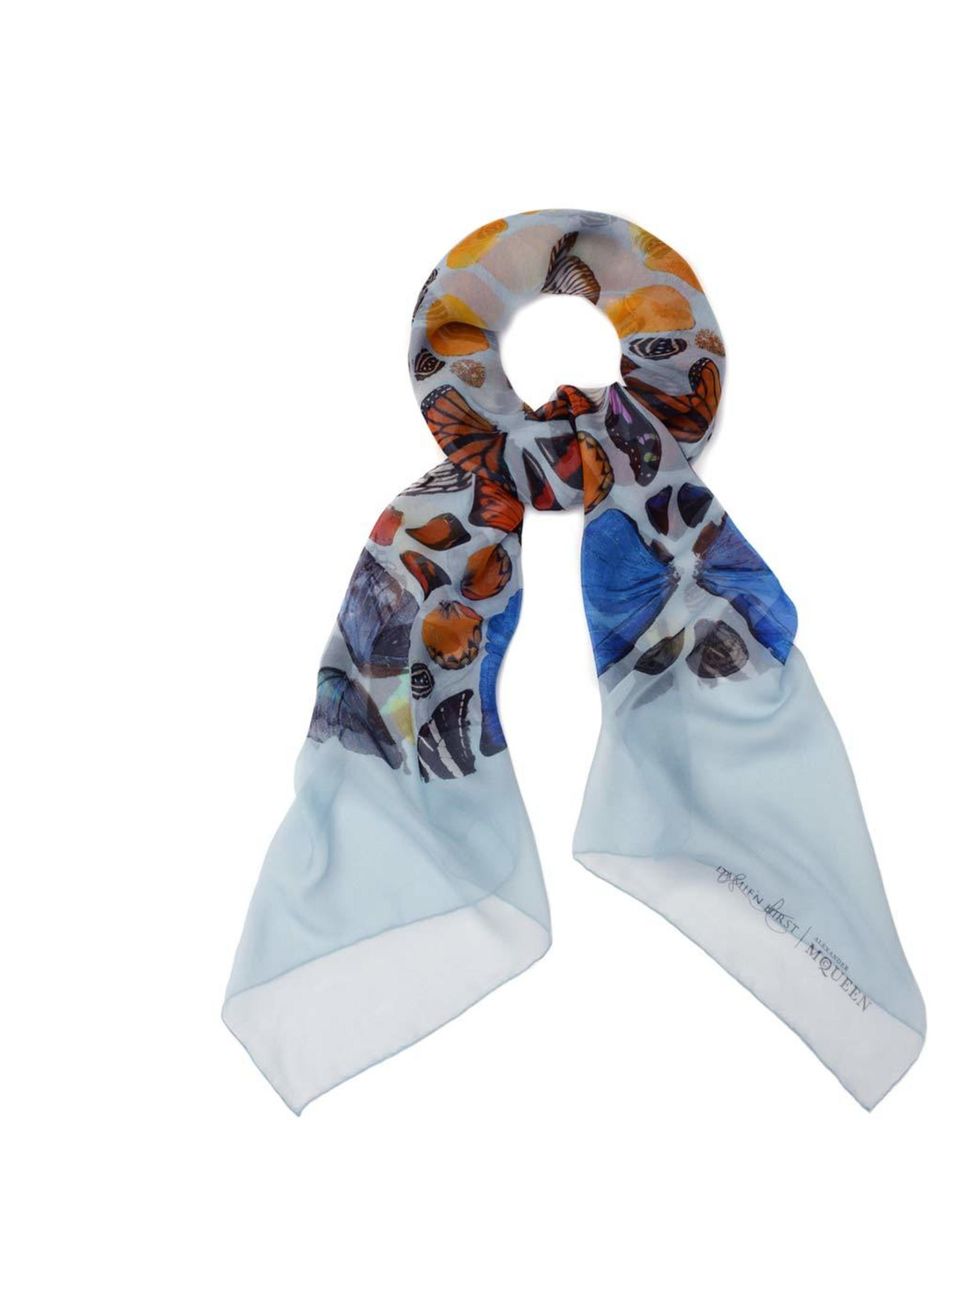 <p>Damien Hirst has turned his hand to fashion, collaborating with Alexander McQueen to produce a collection of their signature printed scarves. And this pairing doesn't disappoint - each scarf is a wearable piece of art.</p><p><a href="http://www.alexand